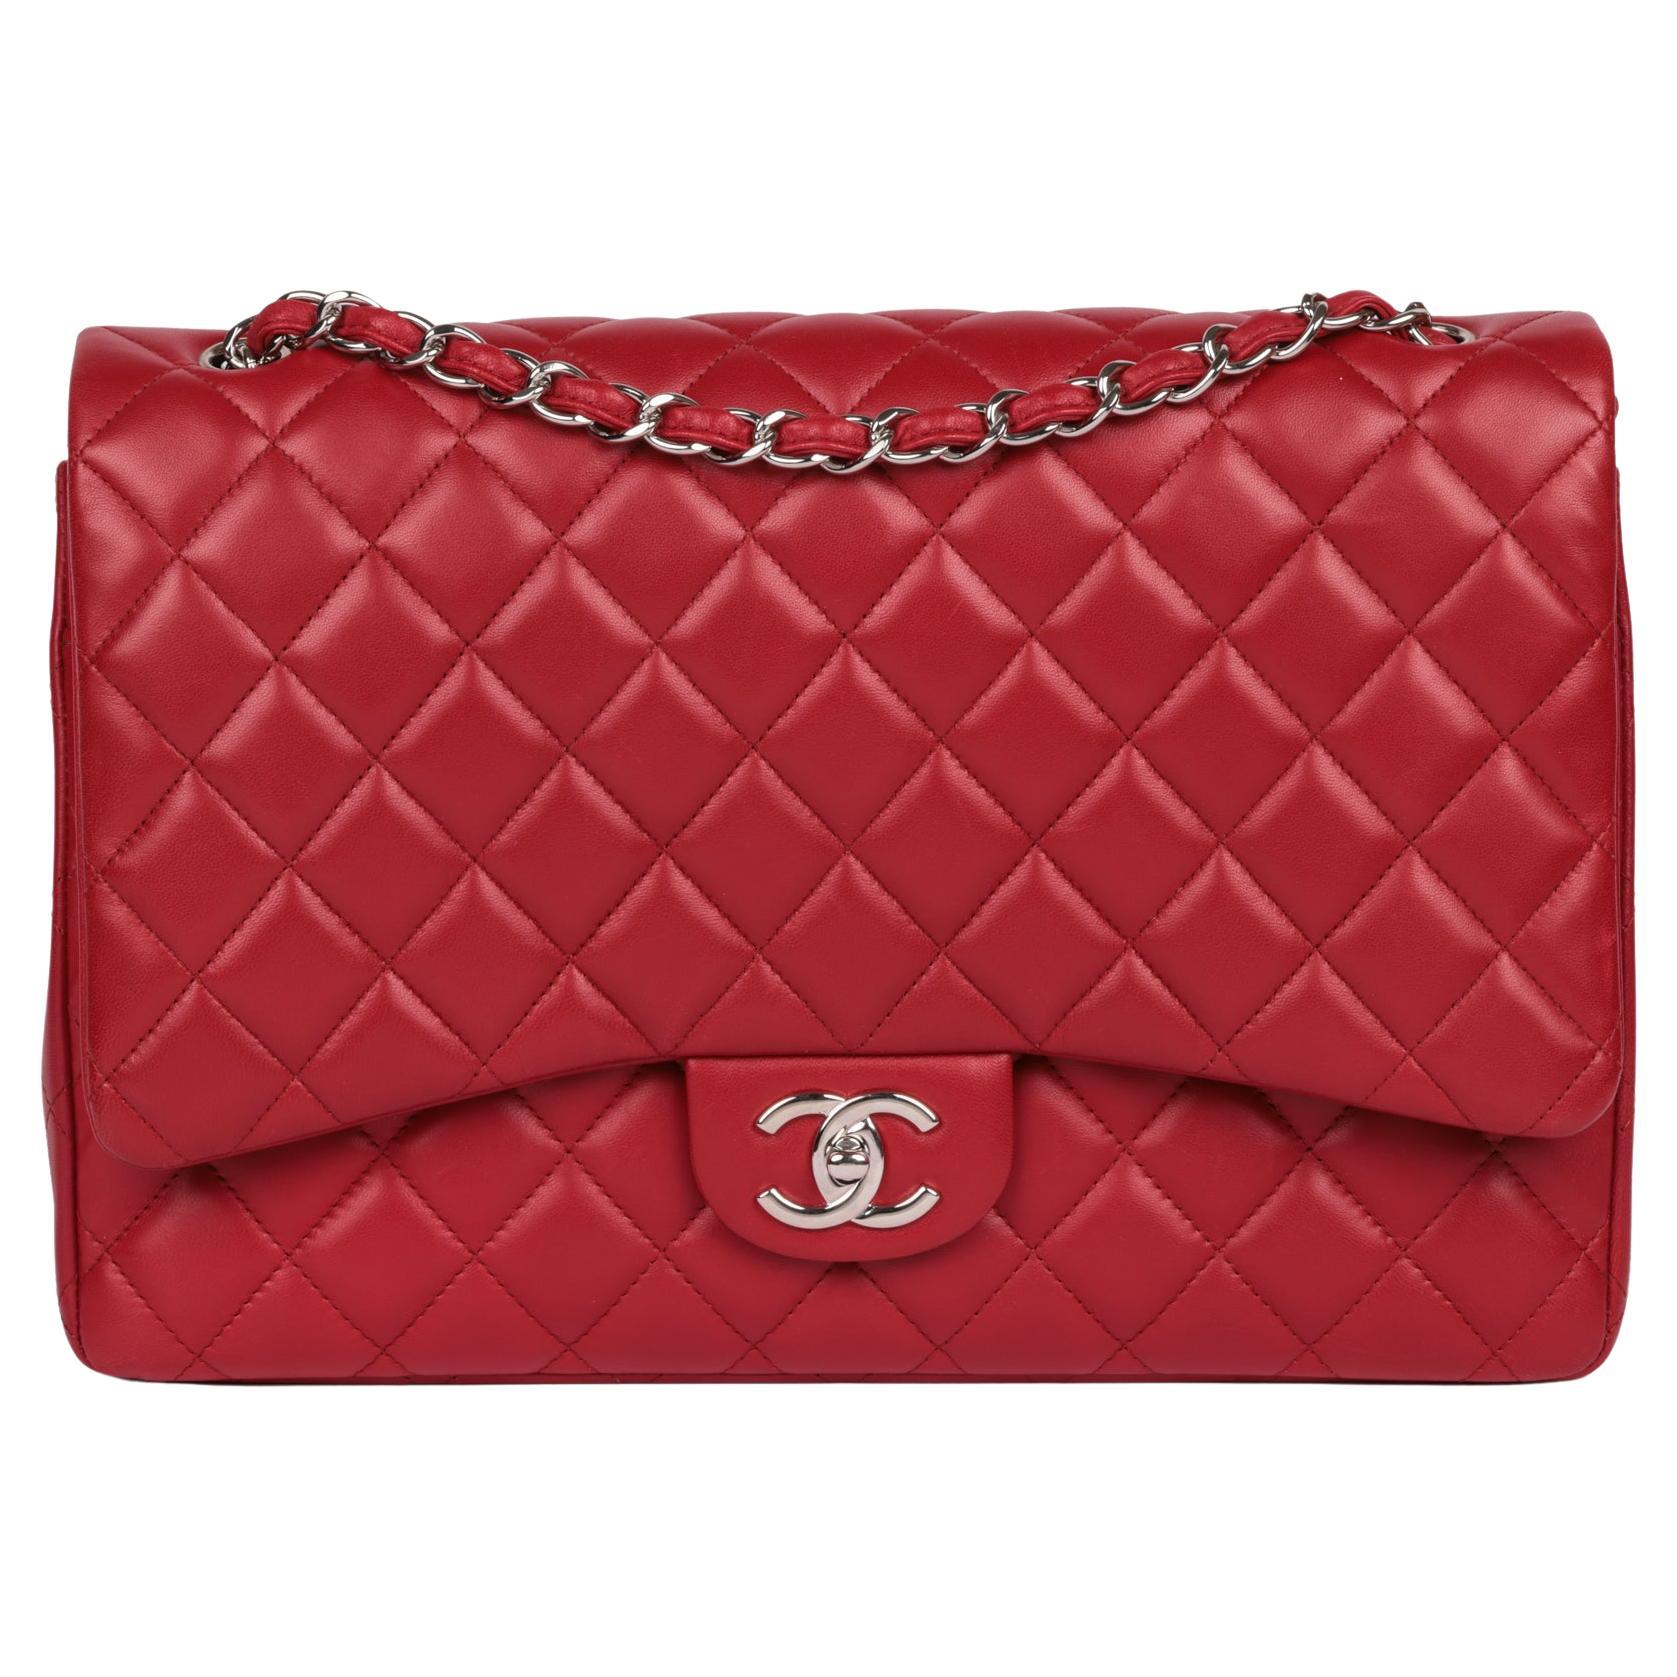 CHANEL Red Quilted Lambskin Leather Maxi Classic Double Flap Bag